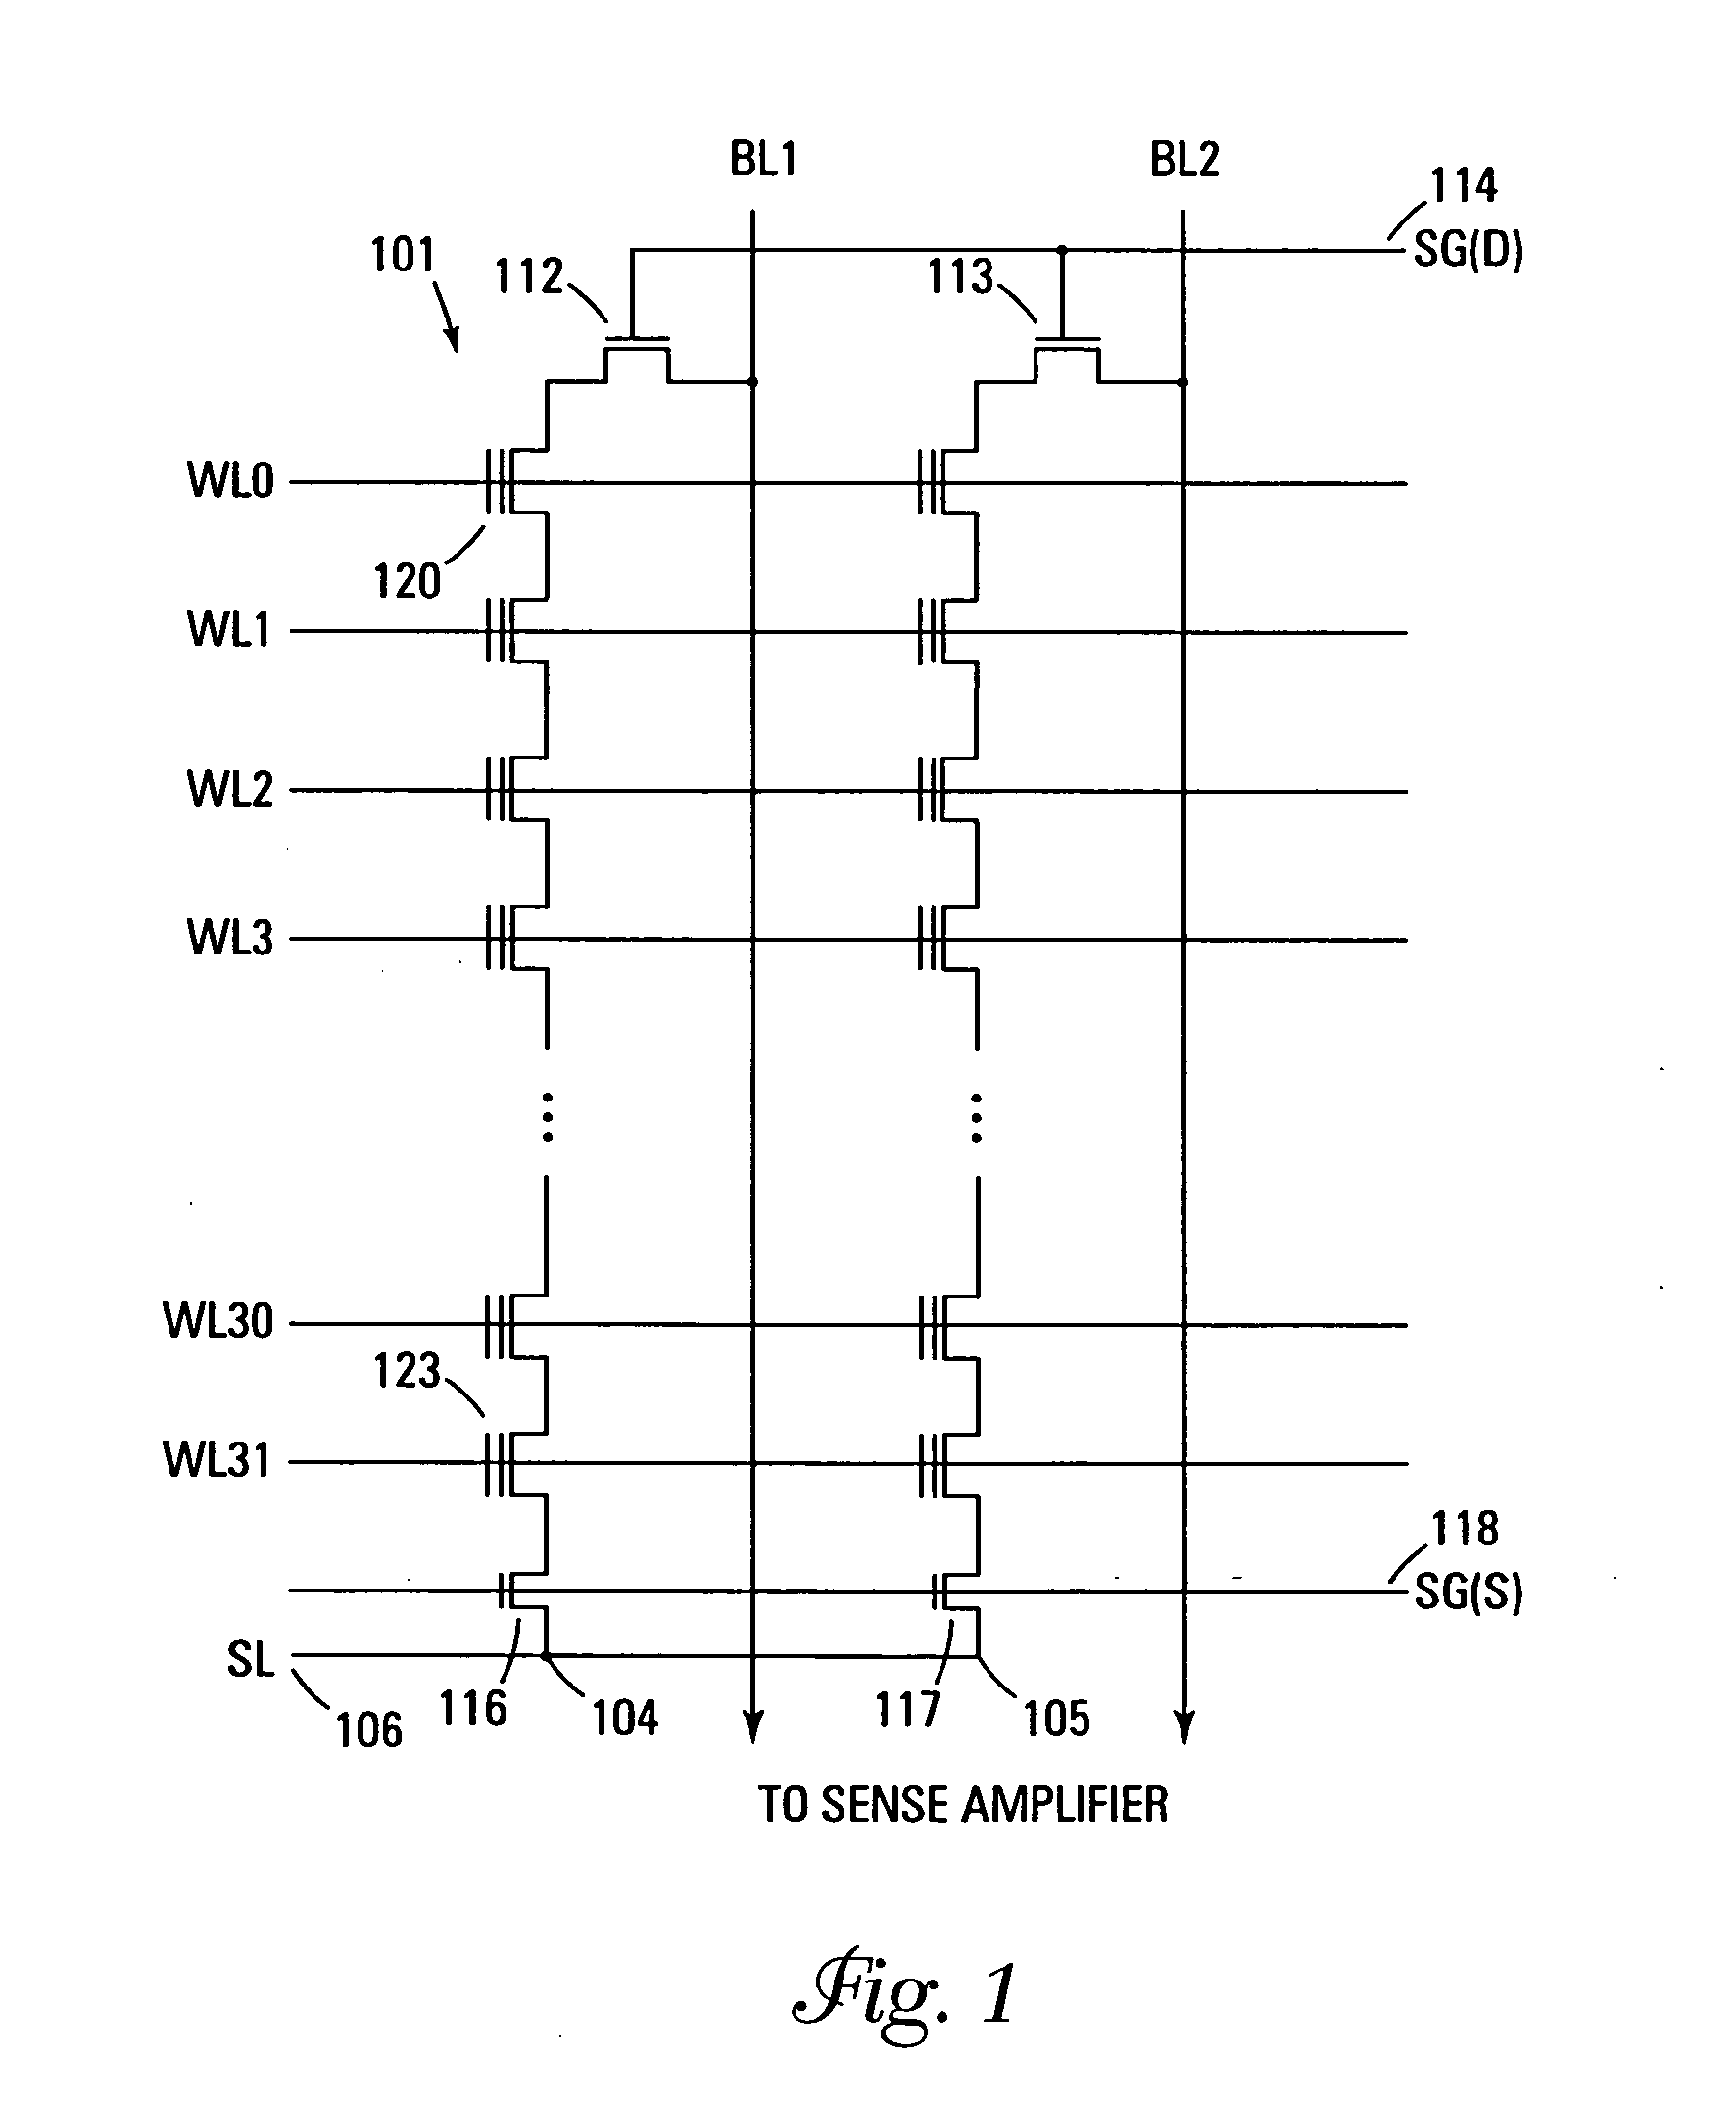 Multiple level cell memory device with single bit per cell, re-mappable memory block